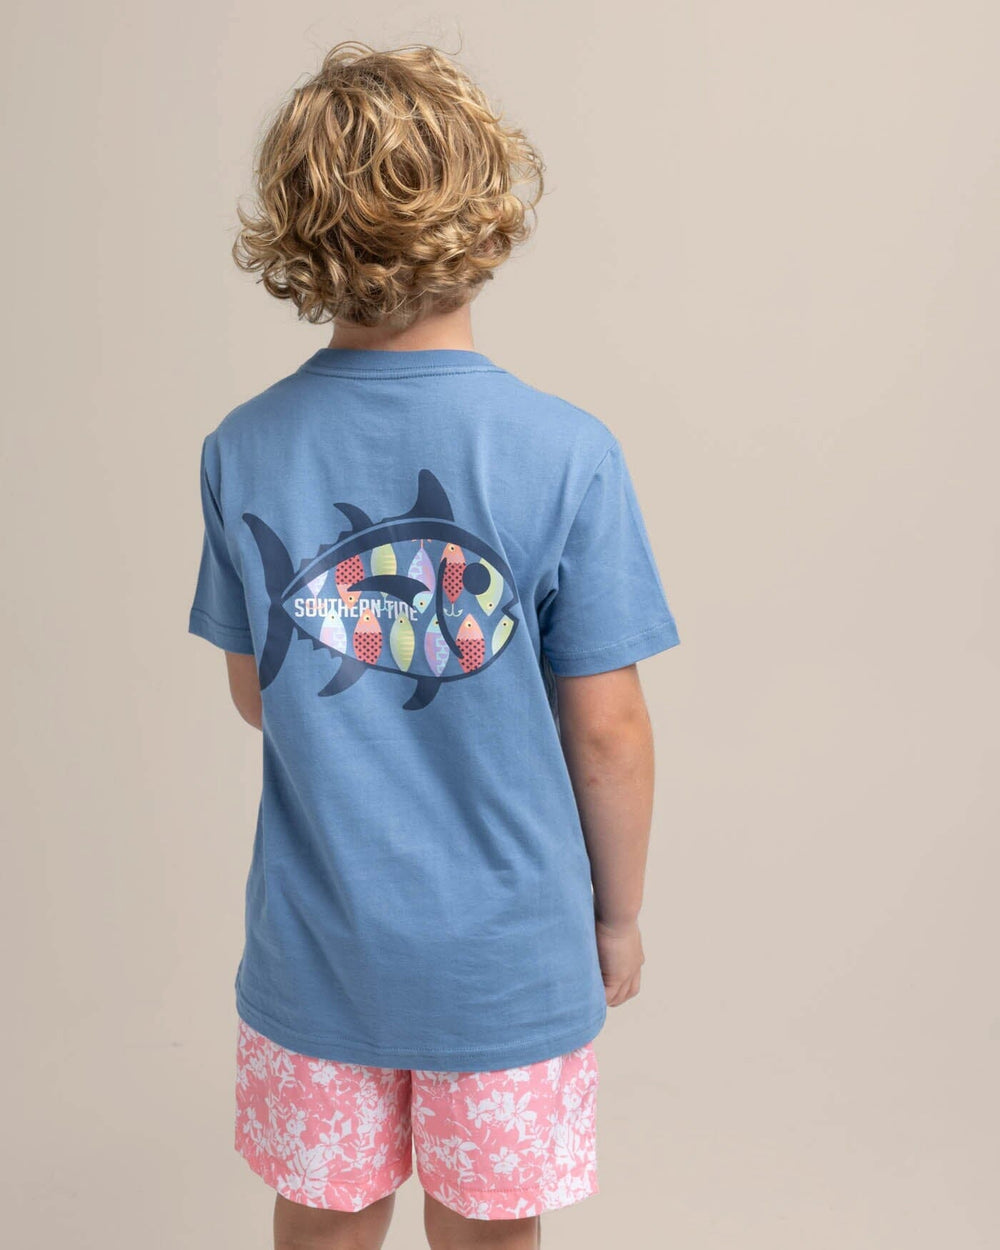 The back view of the Southern Tide Youth Skipjack Lure Fill Short Sleeve T-shirt by Southern Tide - Coronet Blue